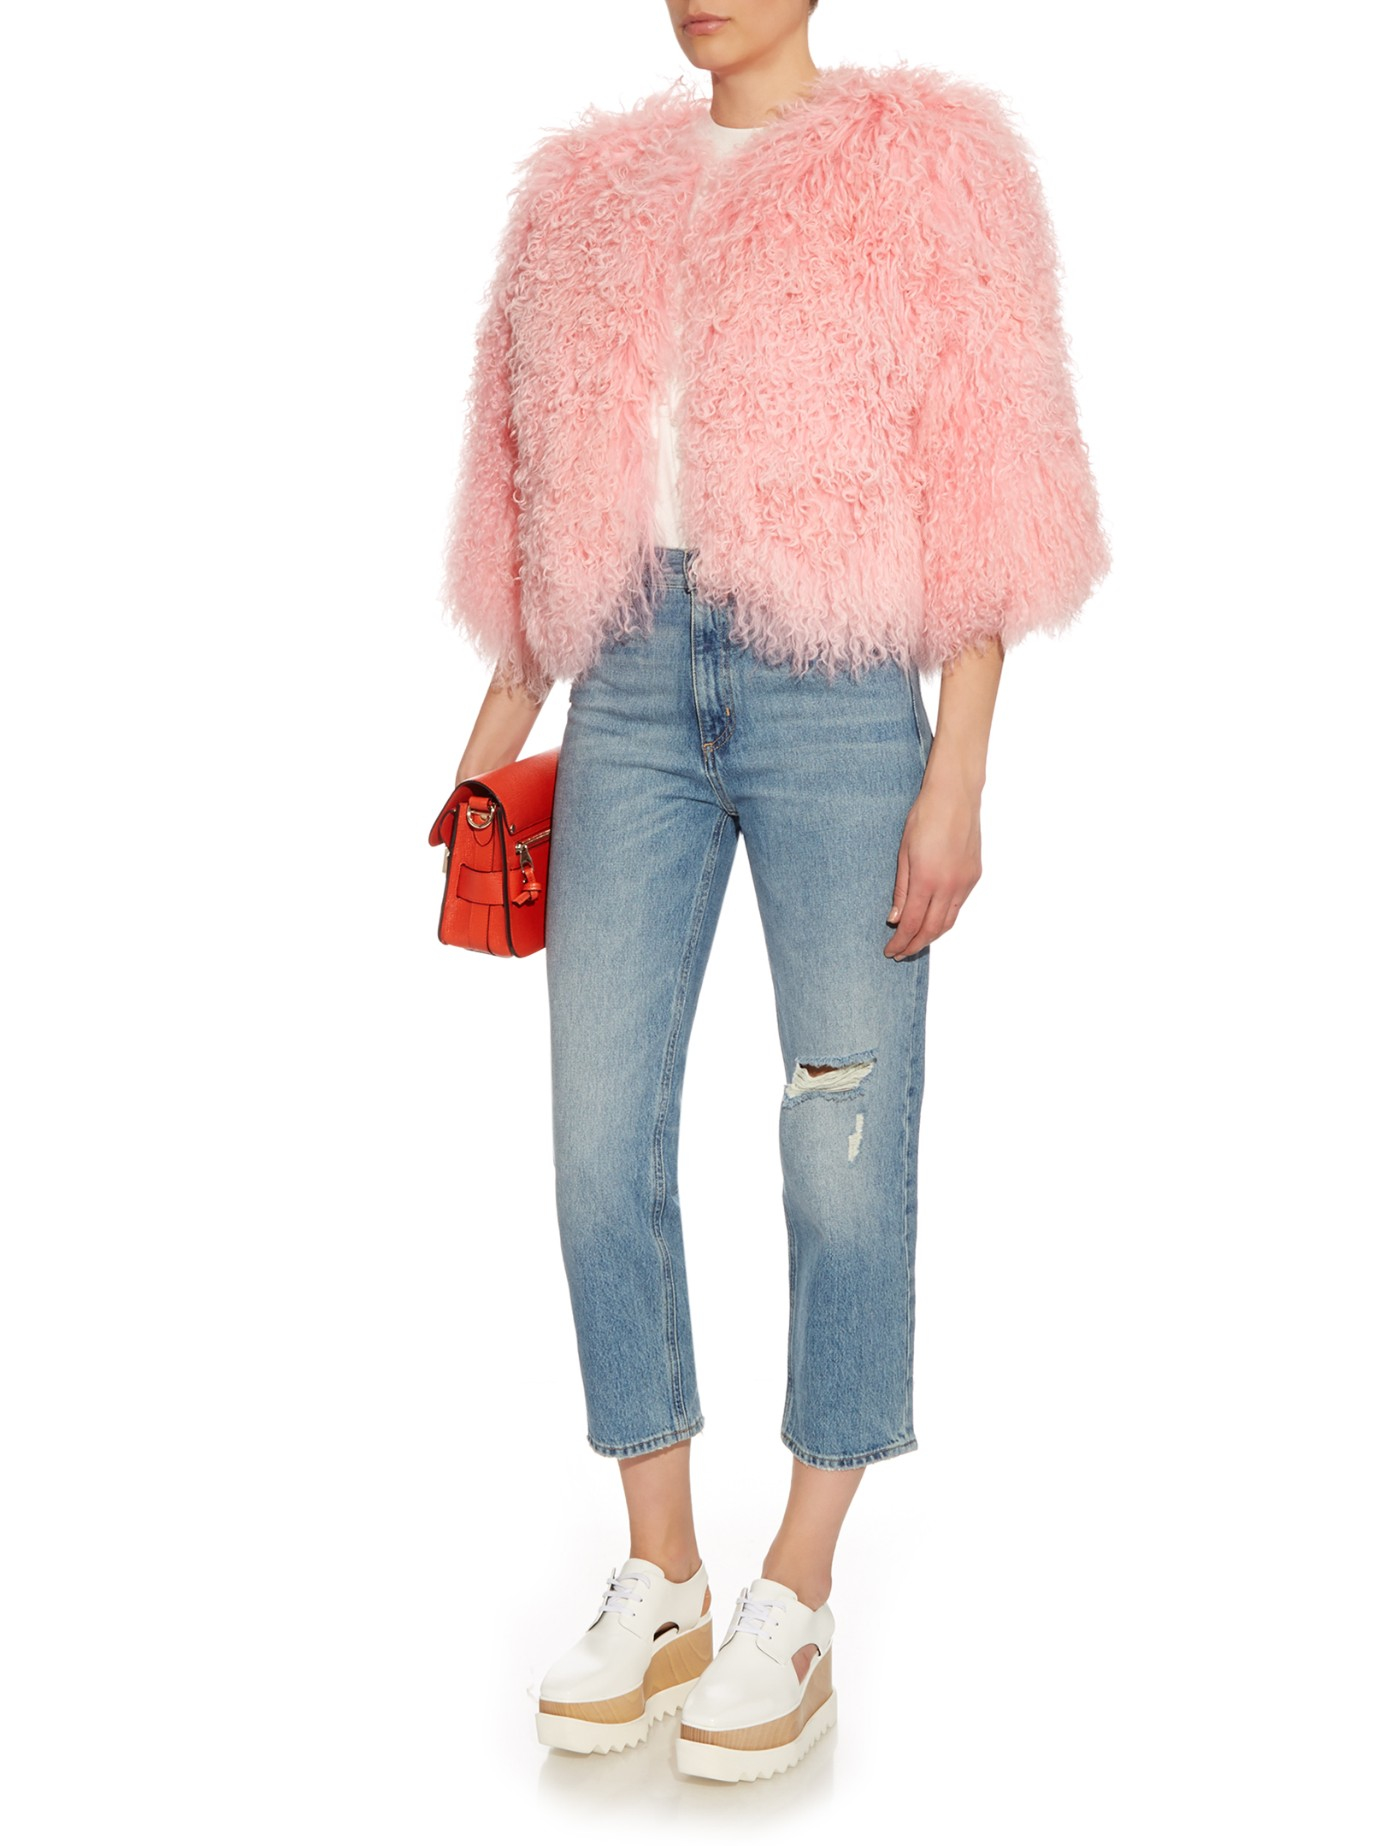 Charlotte Simone Denim Candyfloss Cropped Shearling Jacket in Pink 